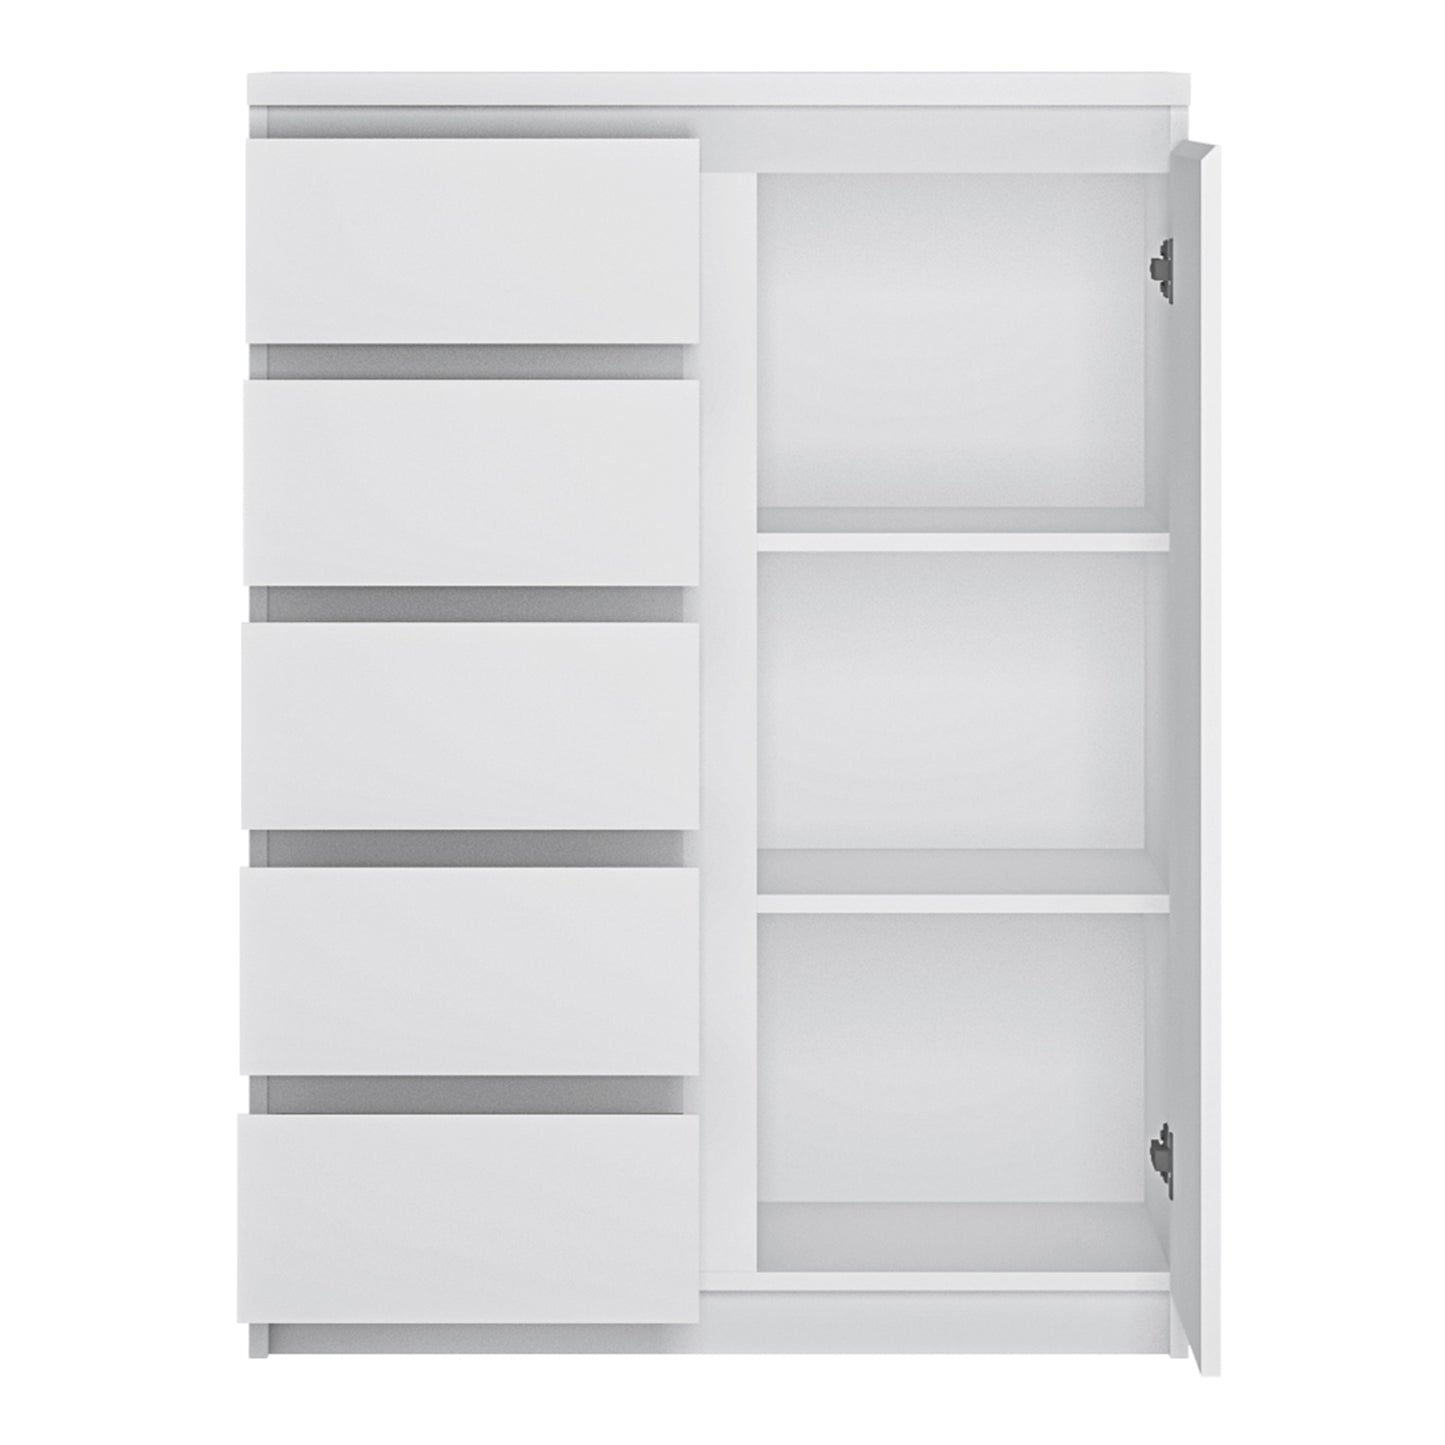 Fribo White Fribo 1 door 5 drawer cabinet in White